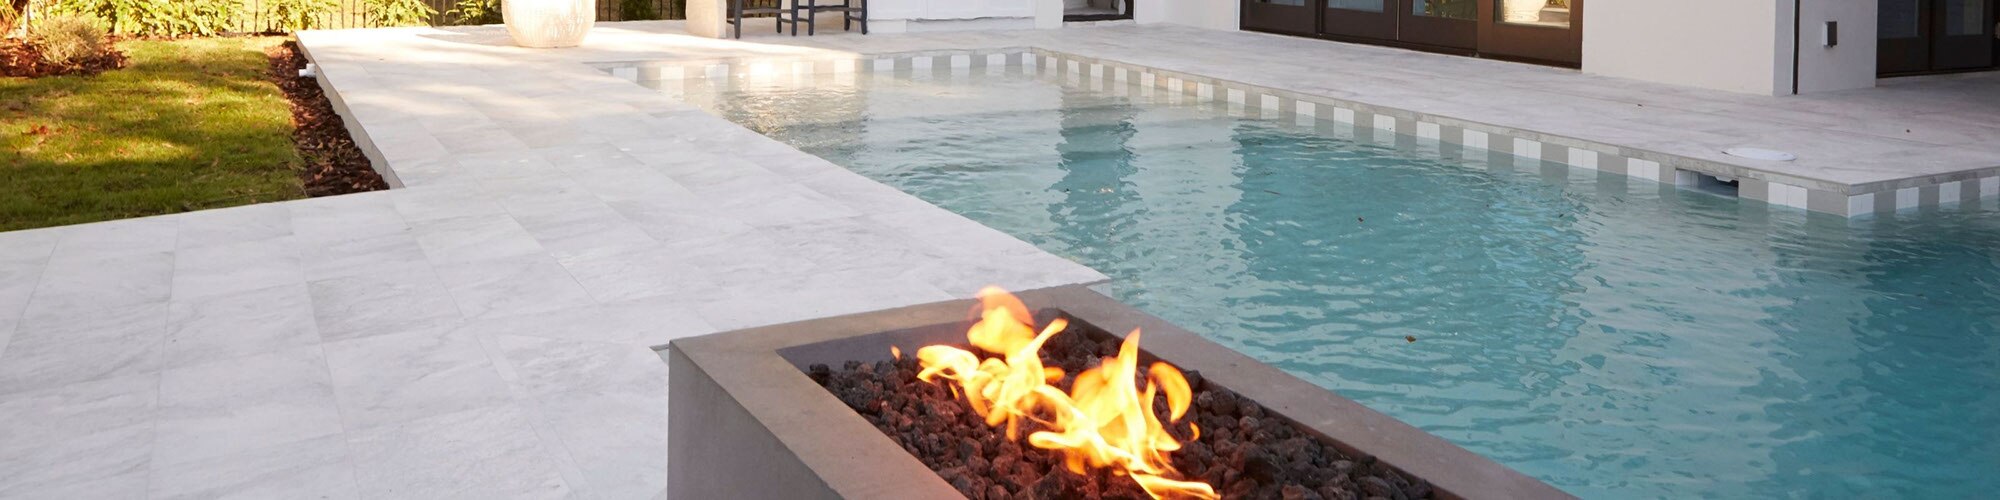 Backyard of house with firepit, pool with white & gray waterline tile and white stone look tile deck.